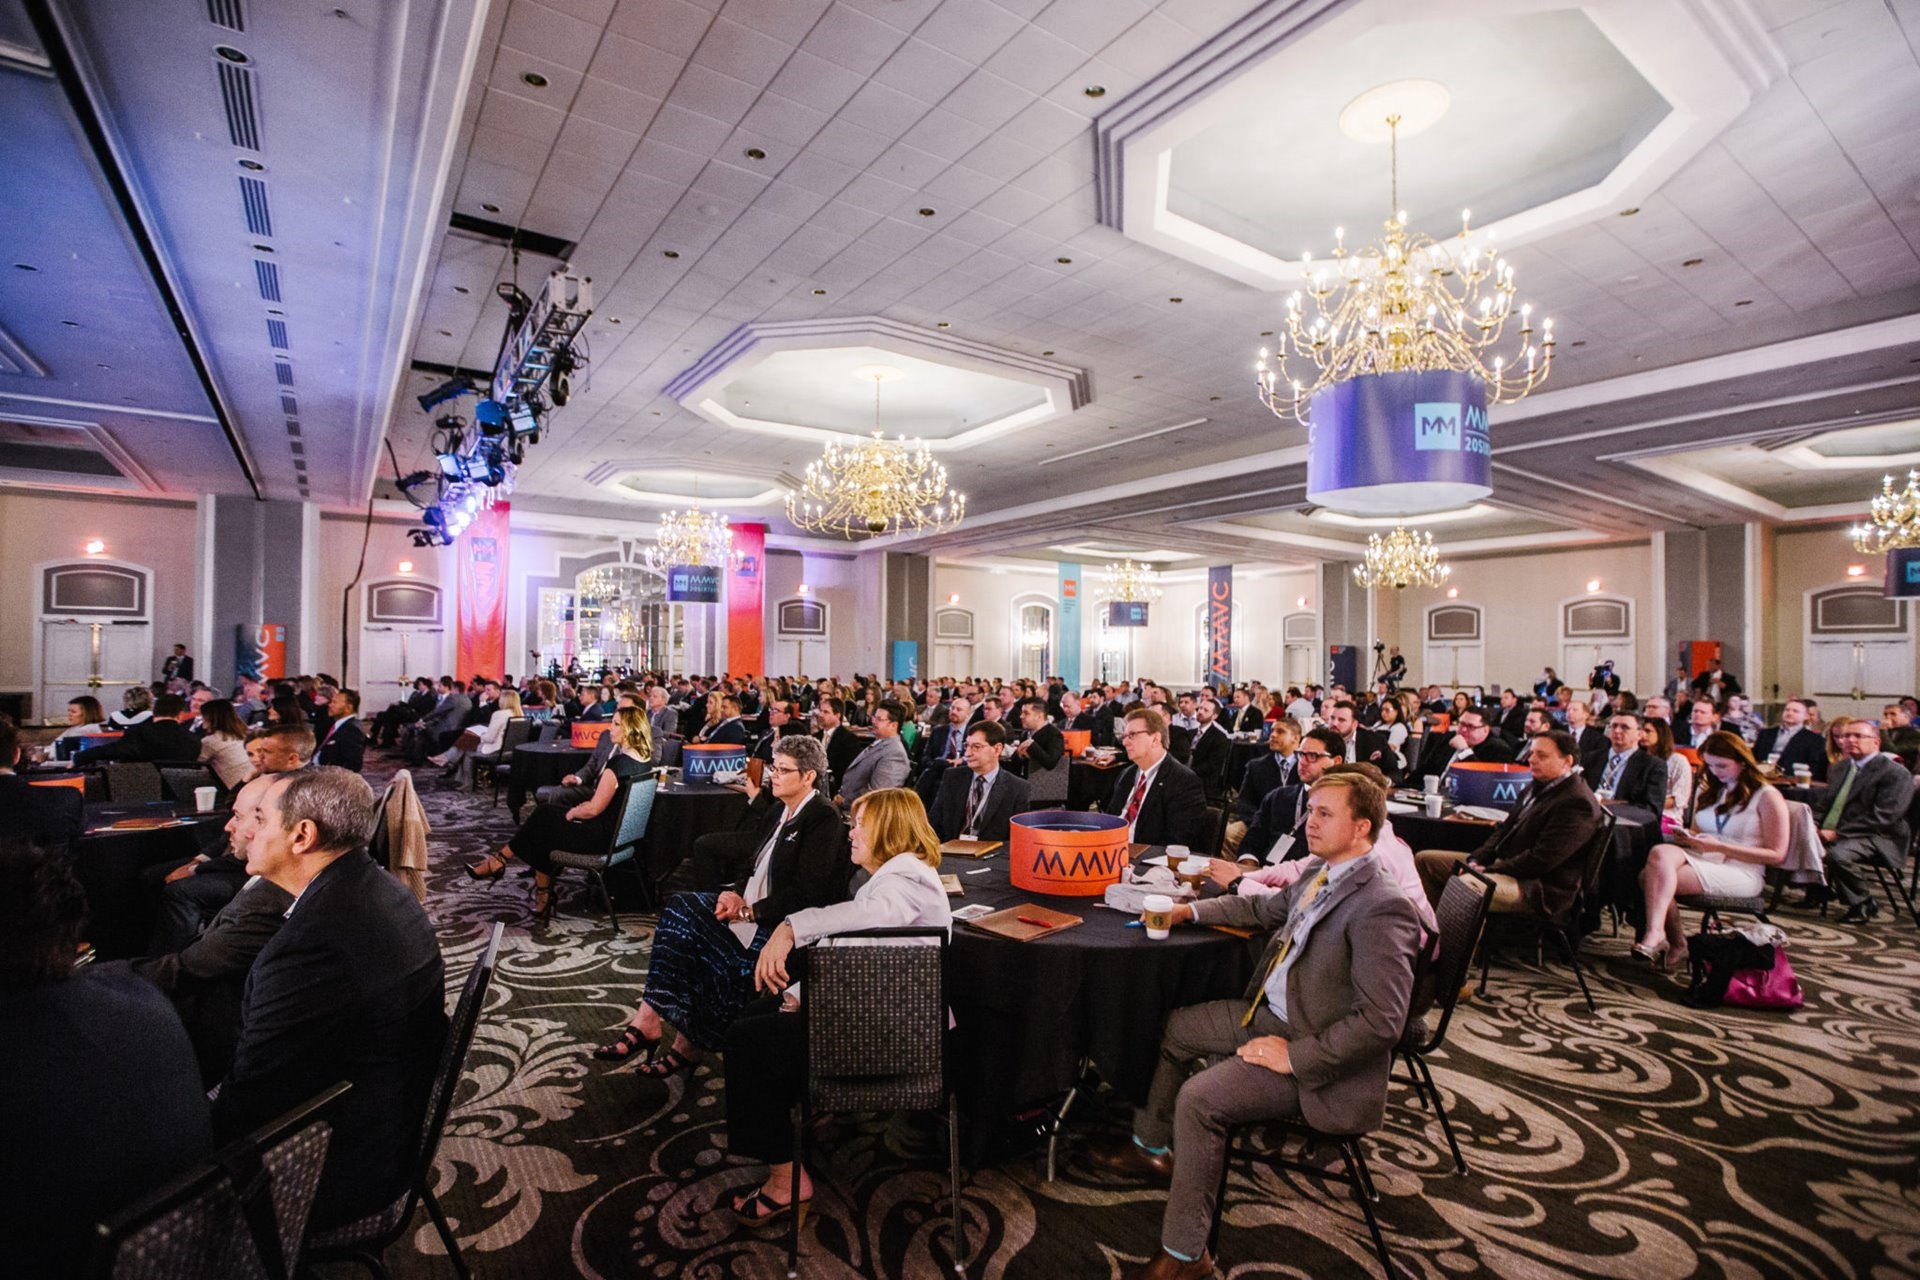 More than 400 Movement market leaders, branch managers and sales leaders converged in Charlotte in March for the Movement Mortgage Vision Conference.